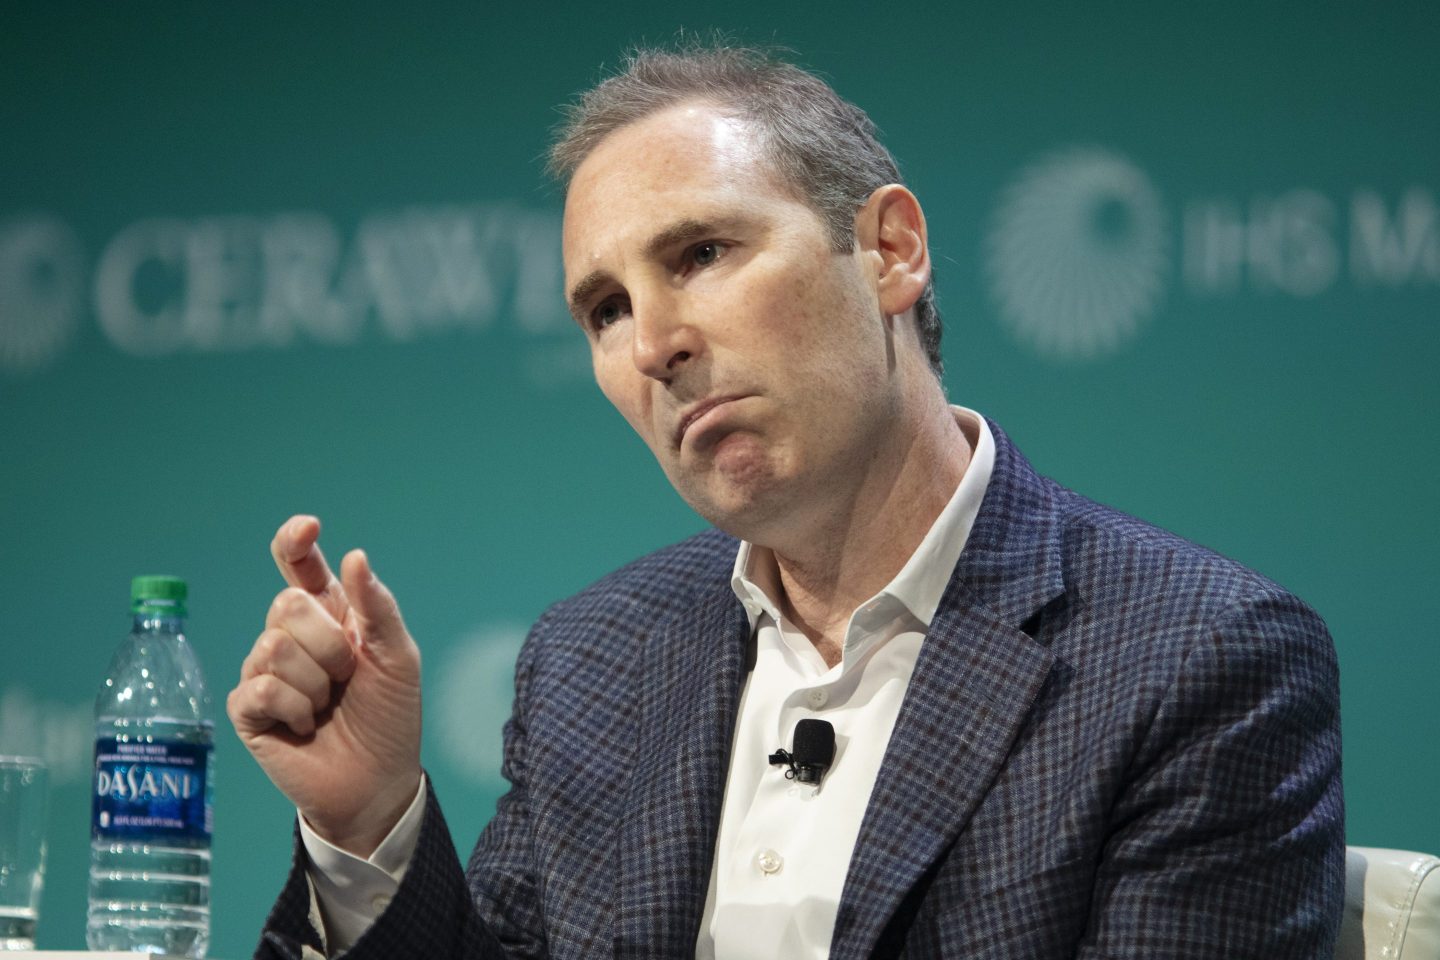 "There's so many things that you can't control in your work life, but you can control your attitude,” Amazon CEO Andy Jassy said.